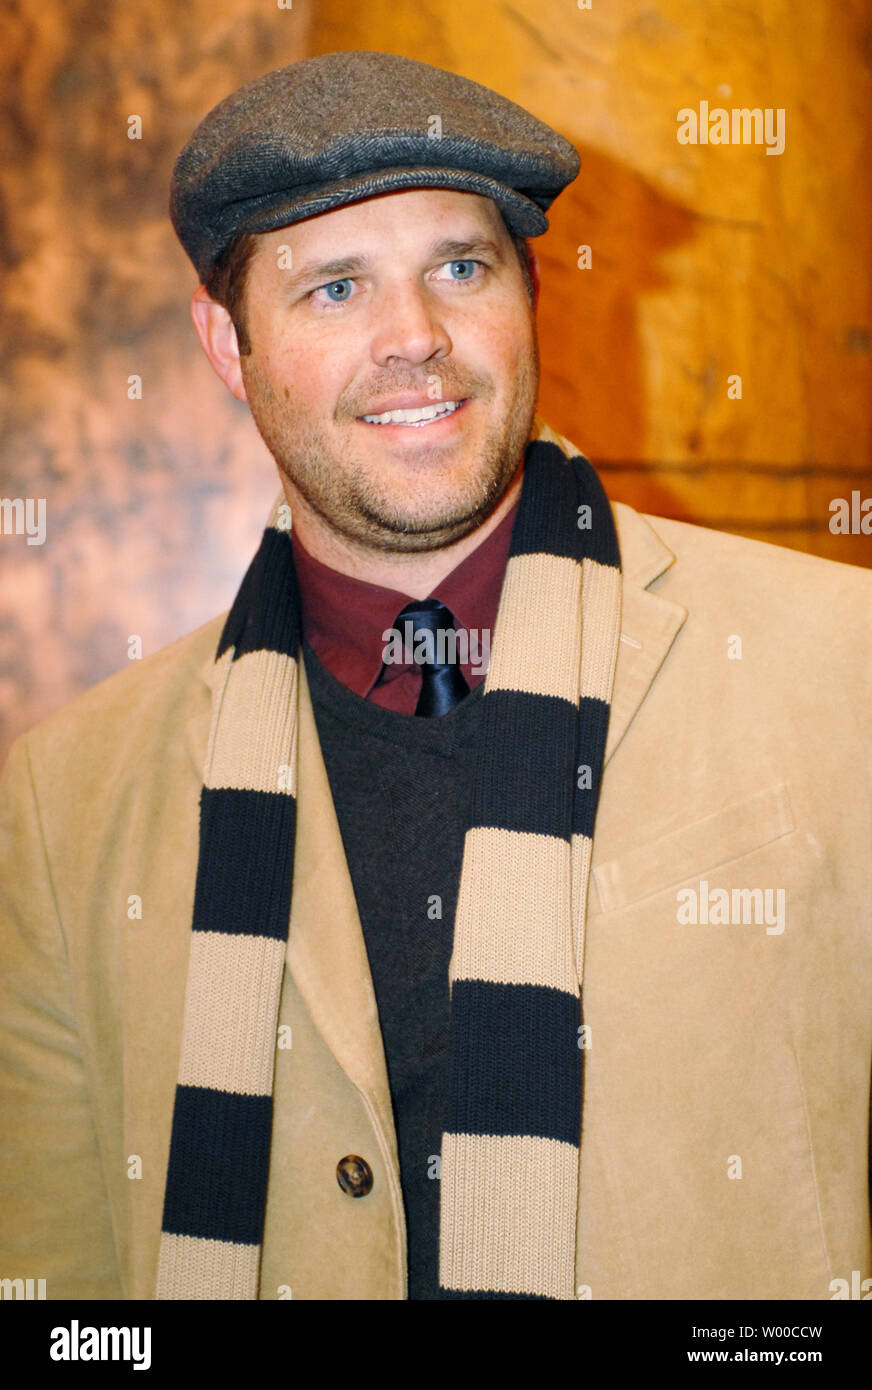 Actor David Denman attends Variety's '10 Directors to Watch' party during the Sundance Film Festival in Park City, Utah on January 21, 2008. (UPI Photo/Alexis C. Glenn). Stock Photo